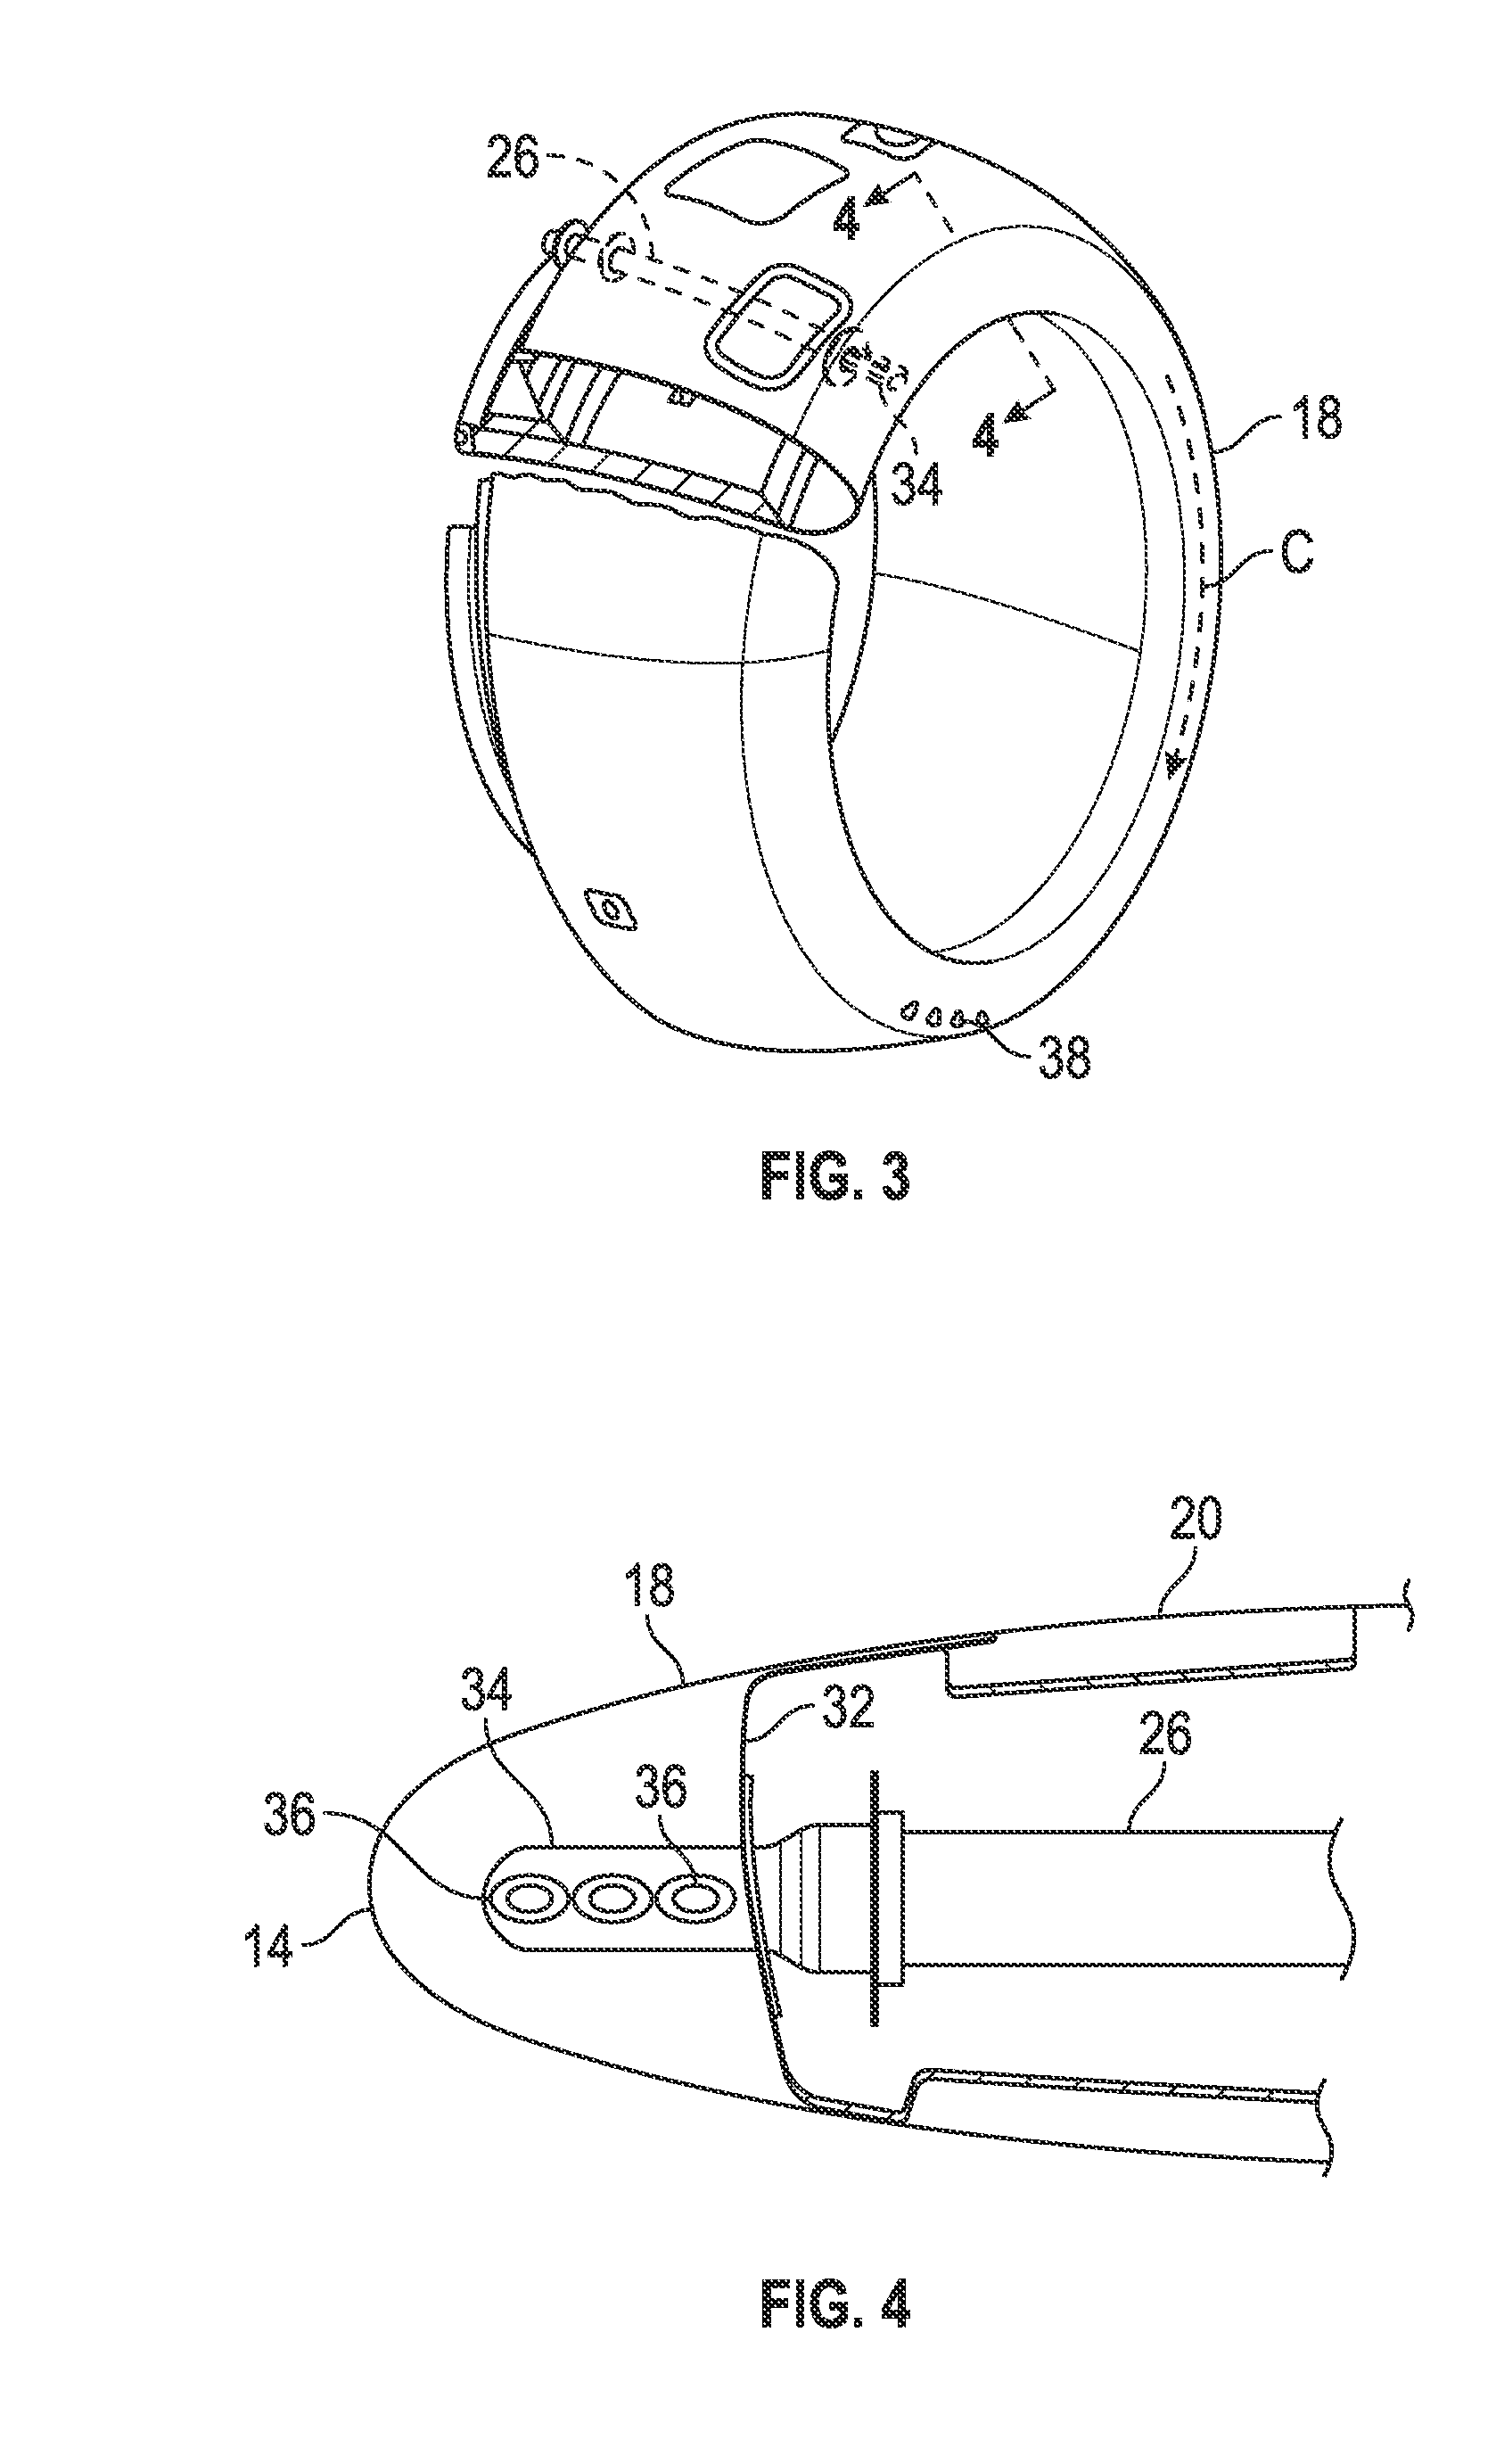 Injector nozzle configuration for swirl Anti-icing system